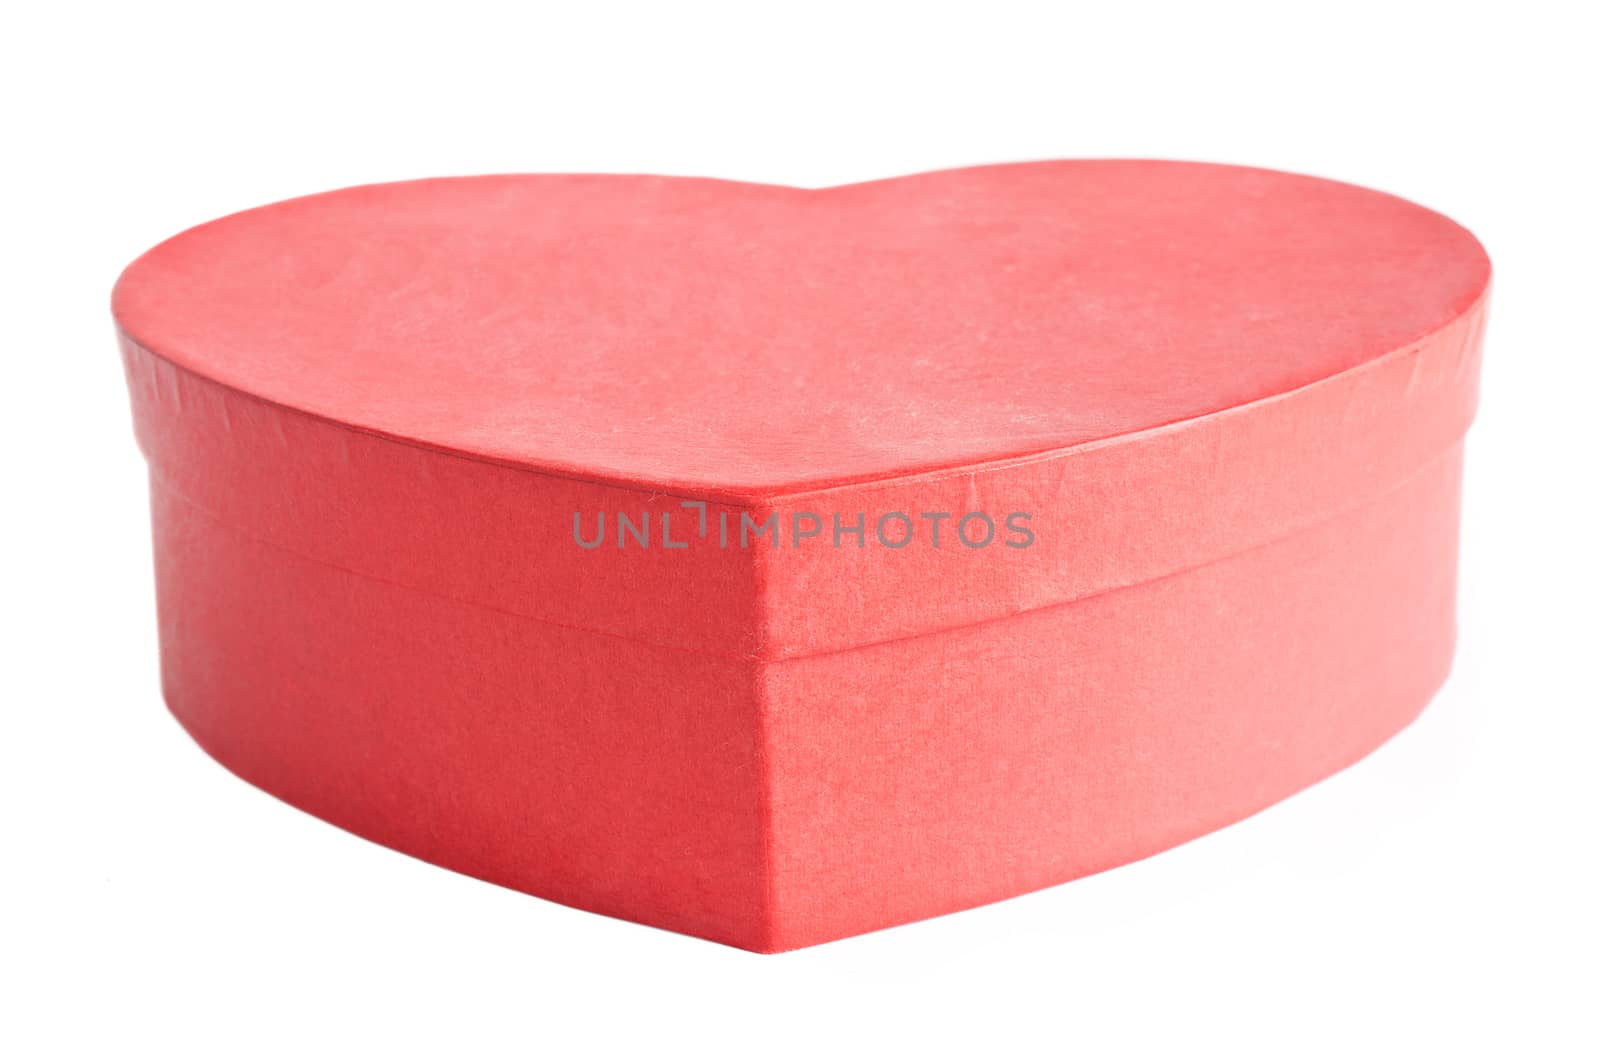 Heart box isolated on white background by maggee